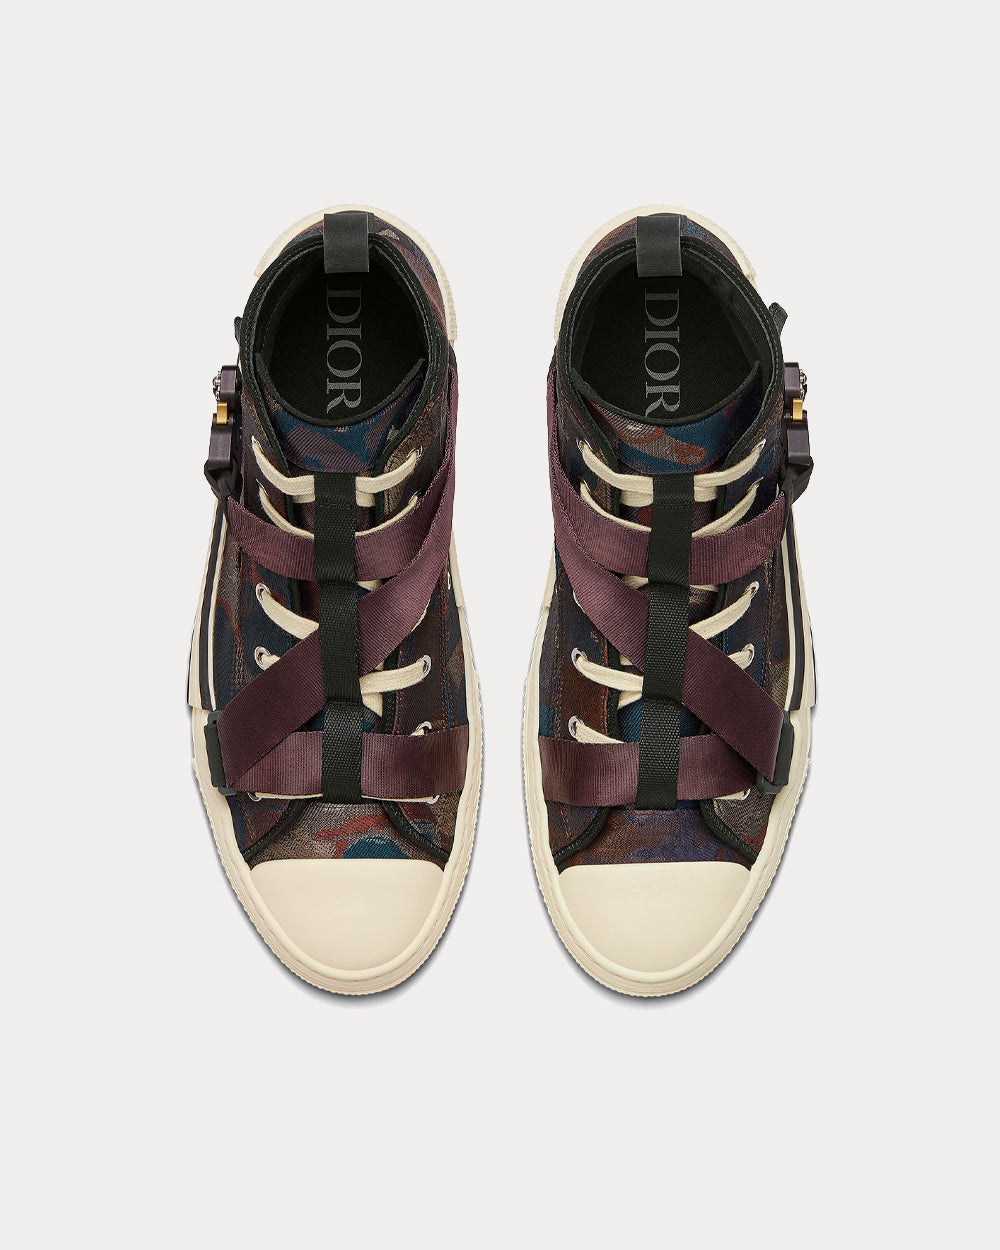 Dior x Peter Doig - B23 Brown Camouflage Jacquard High Top Sneakers